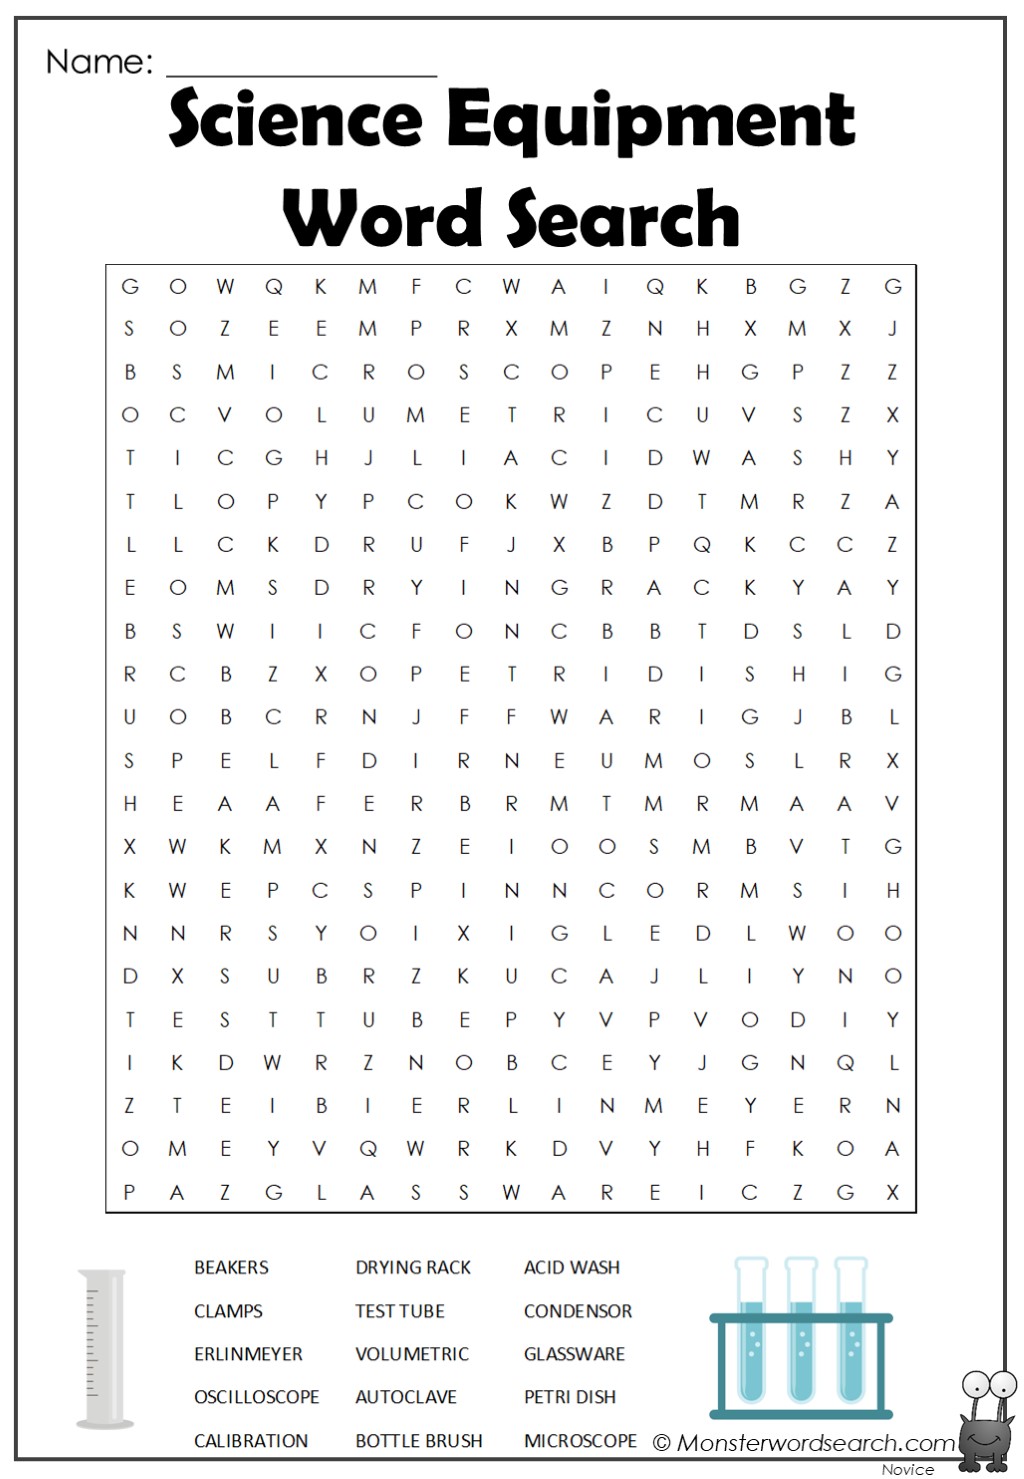 science equipment Word Search- Monster Word Search